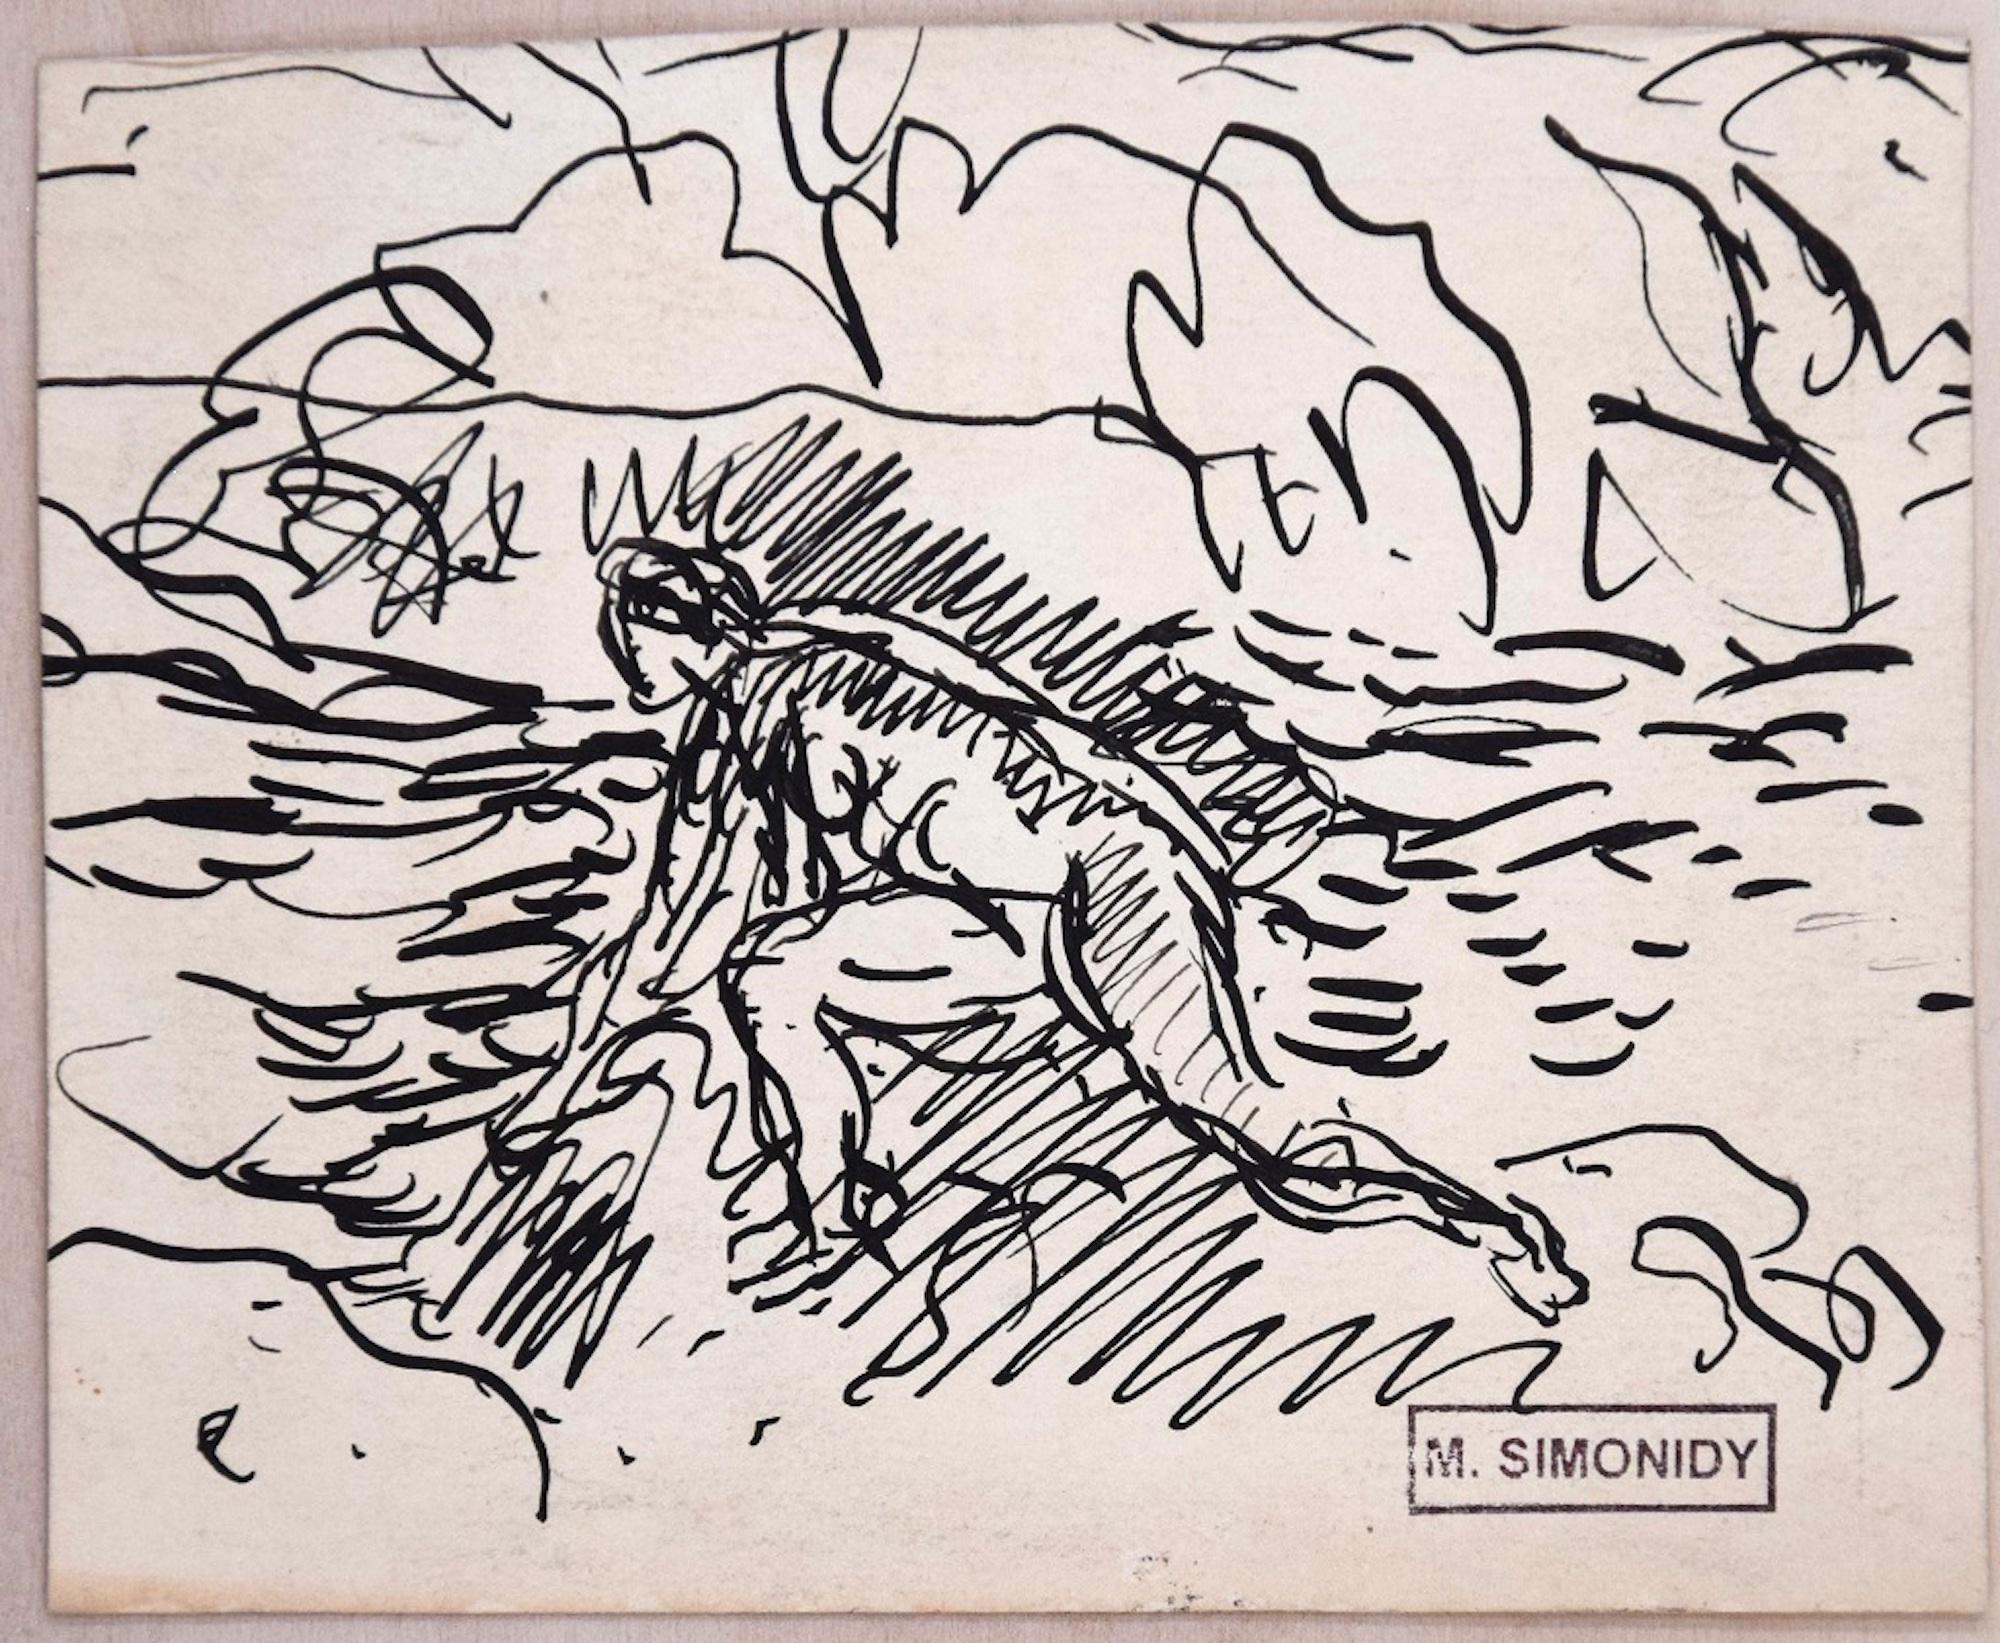 Bather Sketch - Original Ink Drawing by Michel Simonidy - 1910s